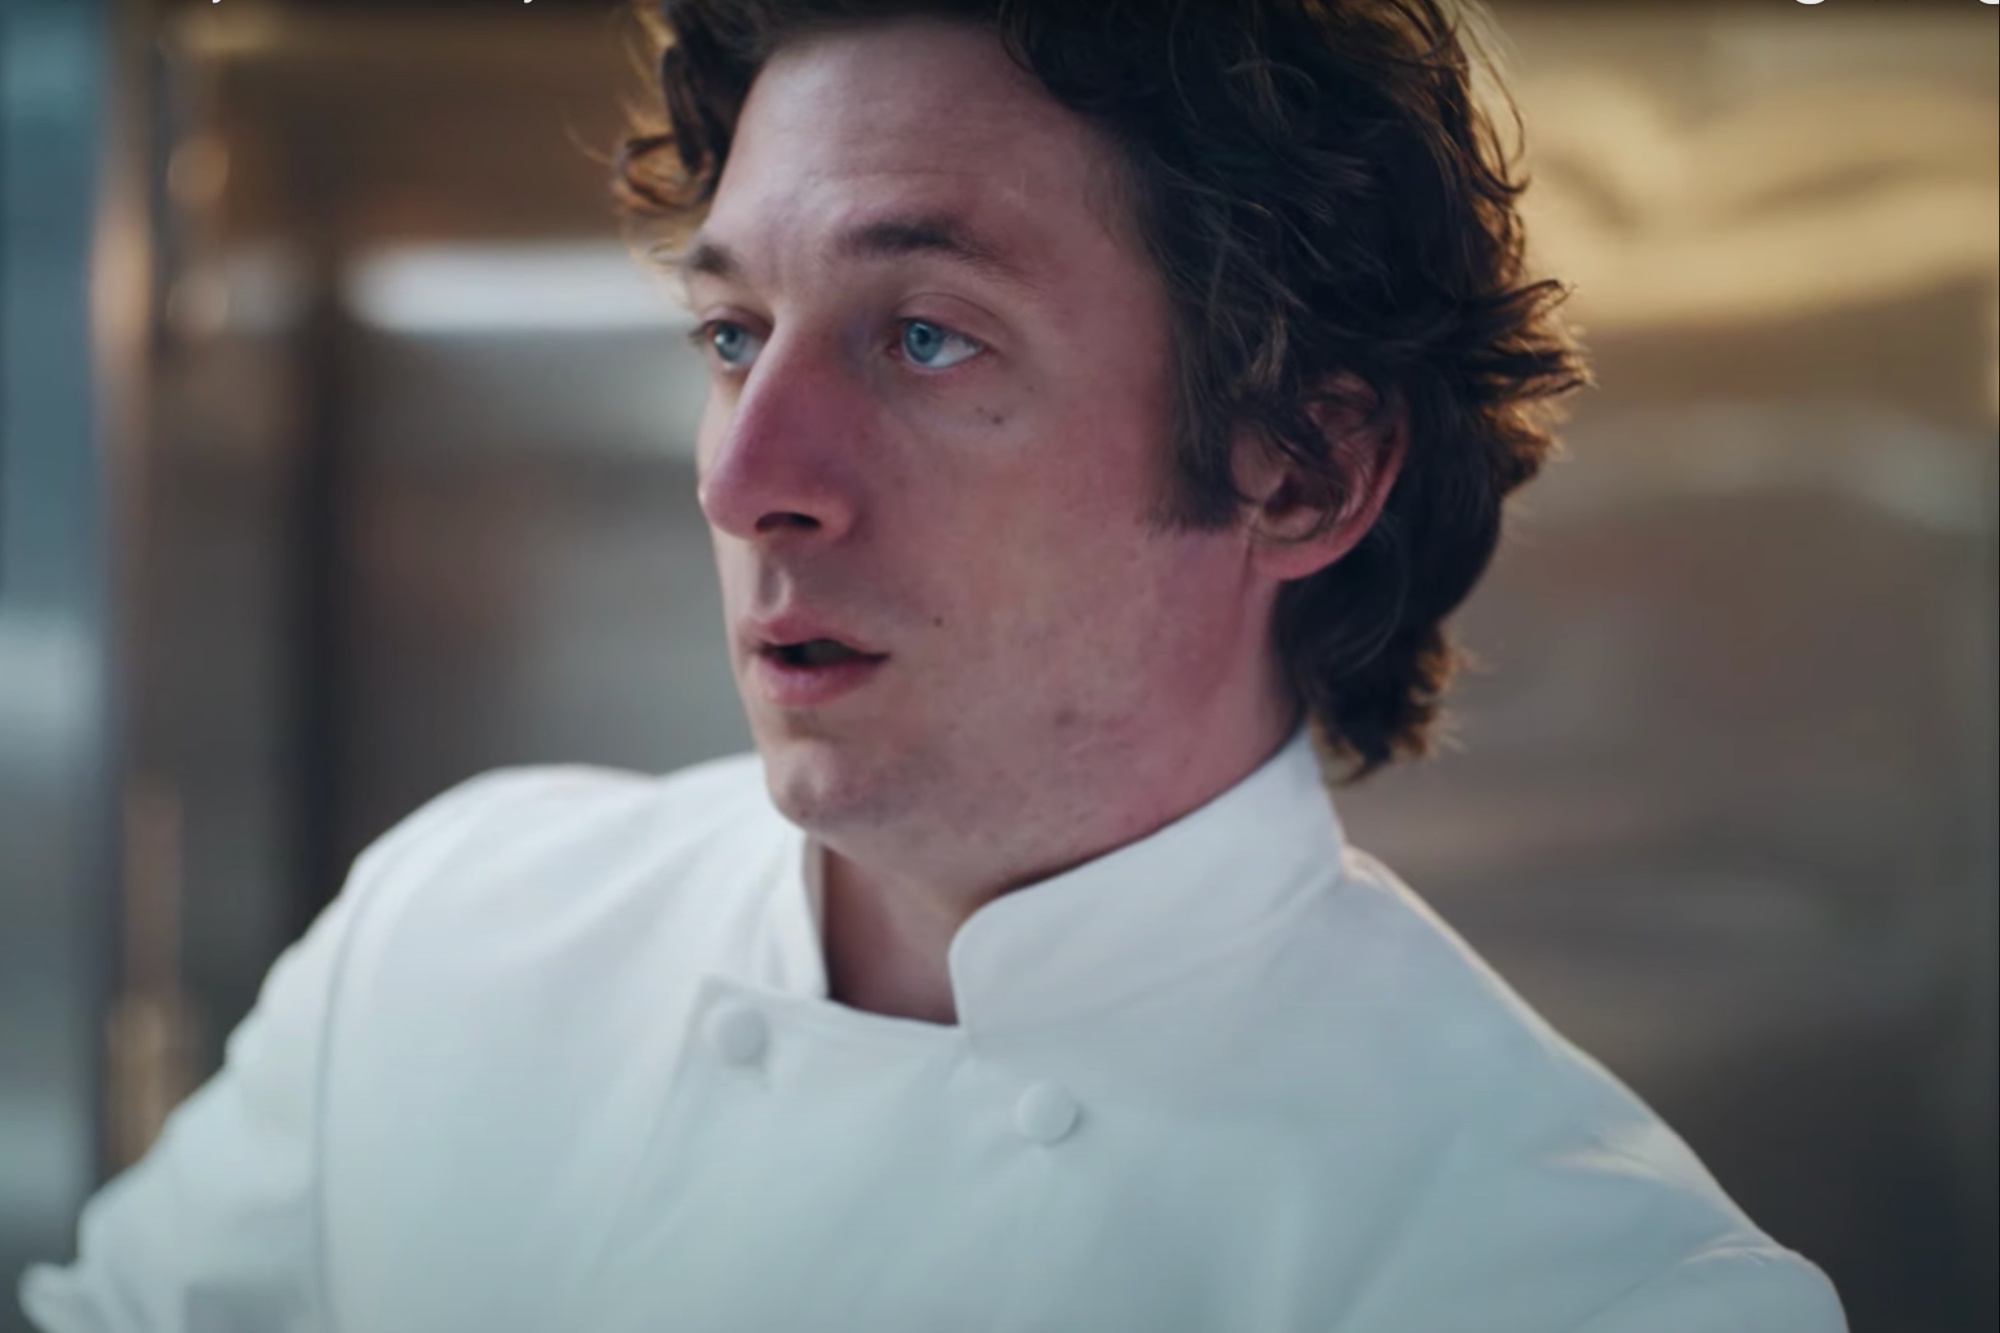 A man in a chef's coat looks to someone off-screen.